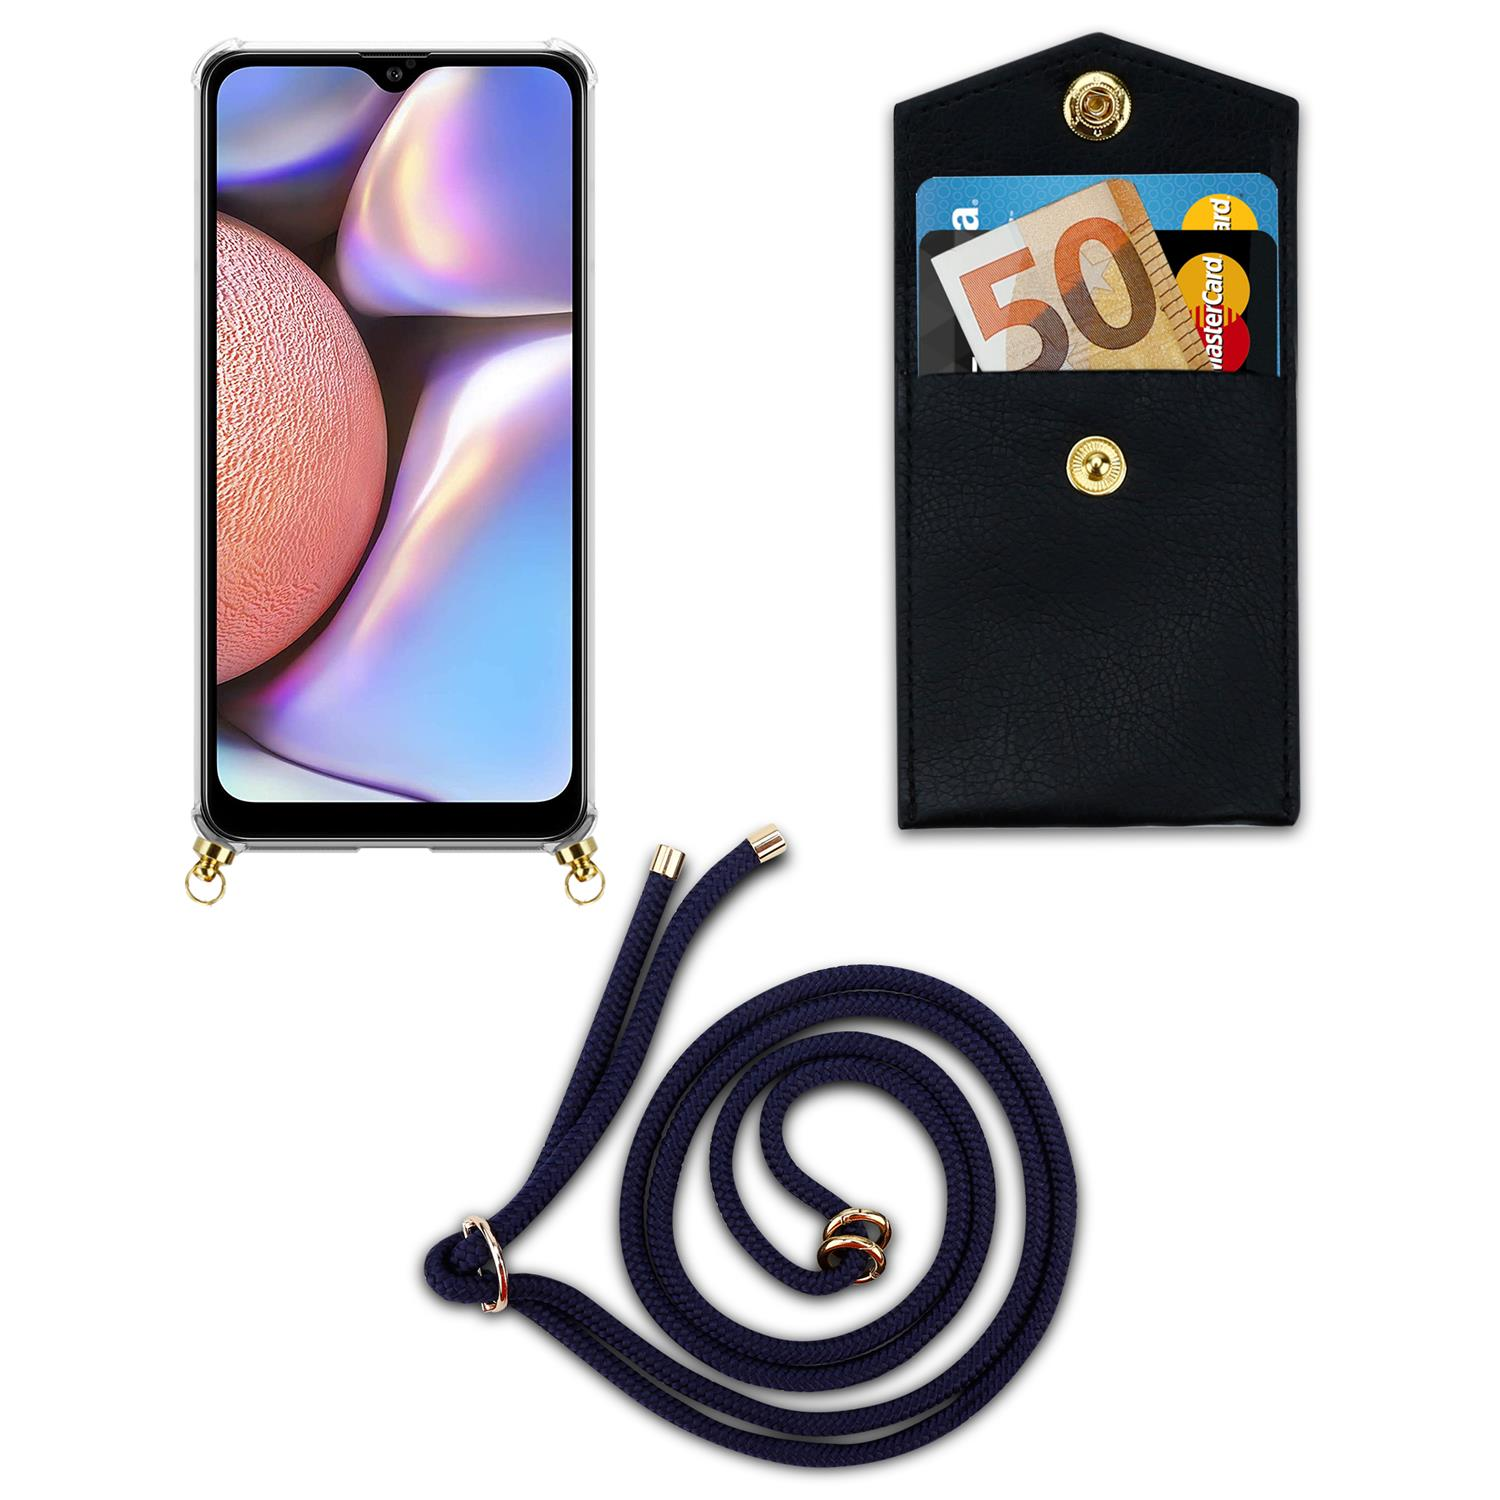 CADORABO Handy Kette Ringen, A10s Galaxy mit M01s, Kordel Gold Band BLAU Samsung, und Backcover, / Hülle, TIEF abnehmbarer